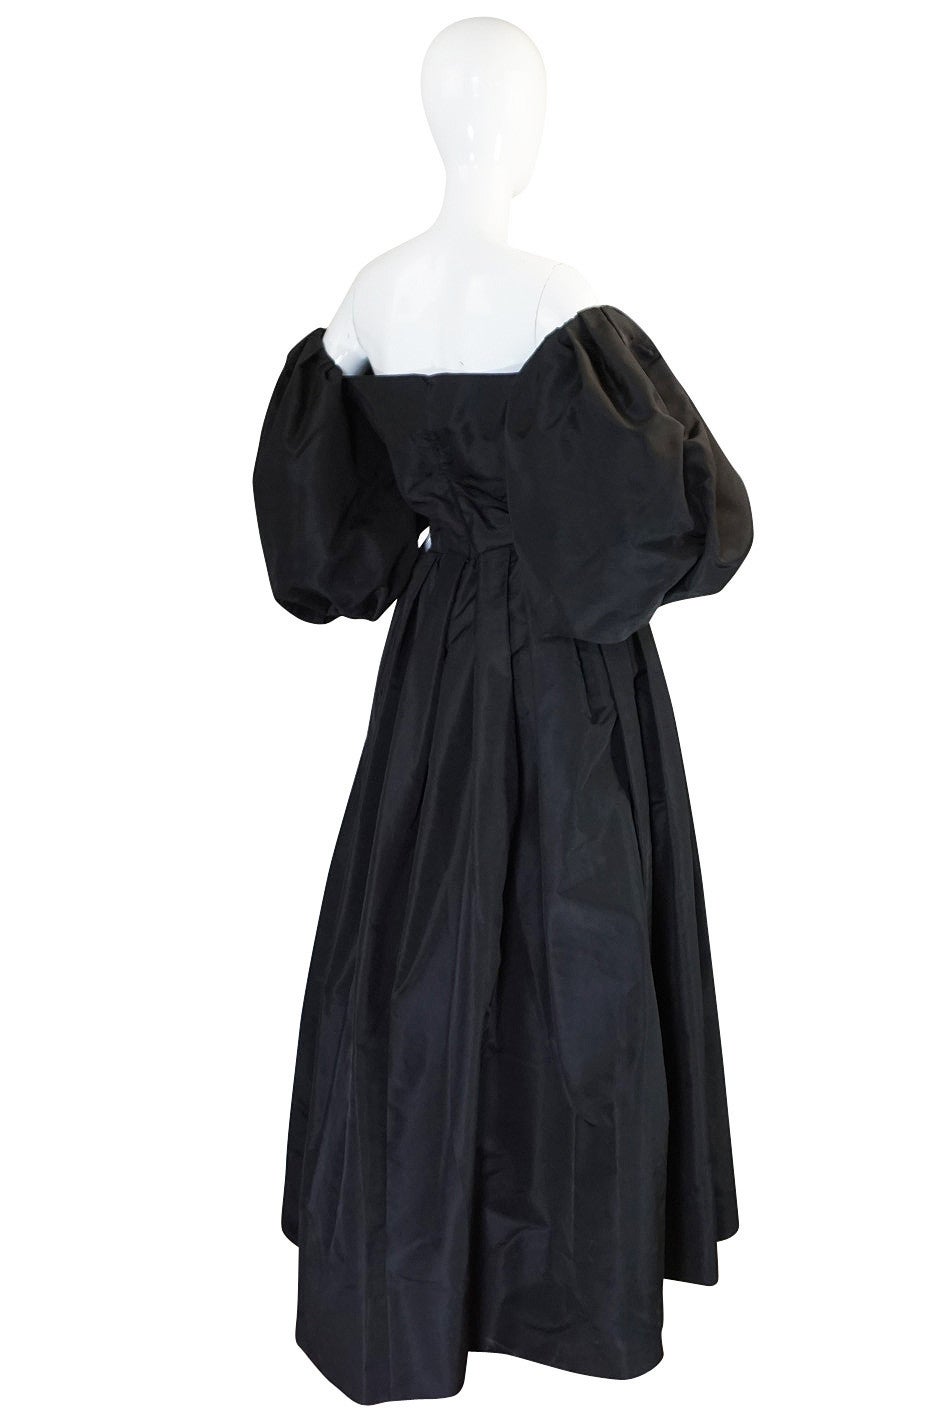 This is an over the top, unbelievable silk taffeta gown in a black silk taffeta by the great Pauline Trigere. The dress is both simple and at the same time elaborate and dramatic. Simple in that has been done in one solid color and the lines are so